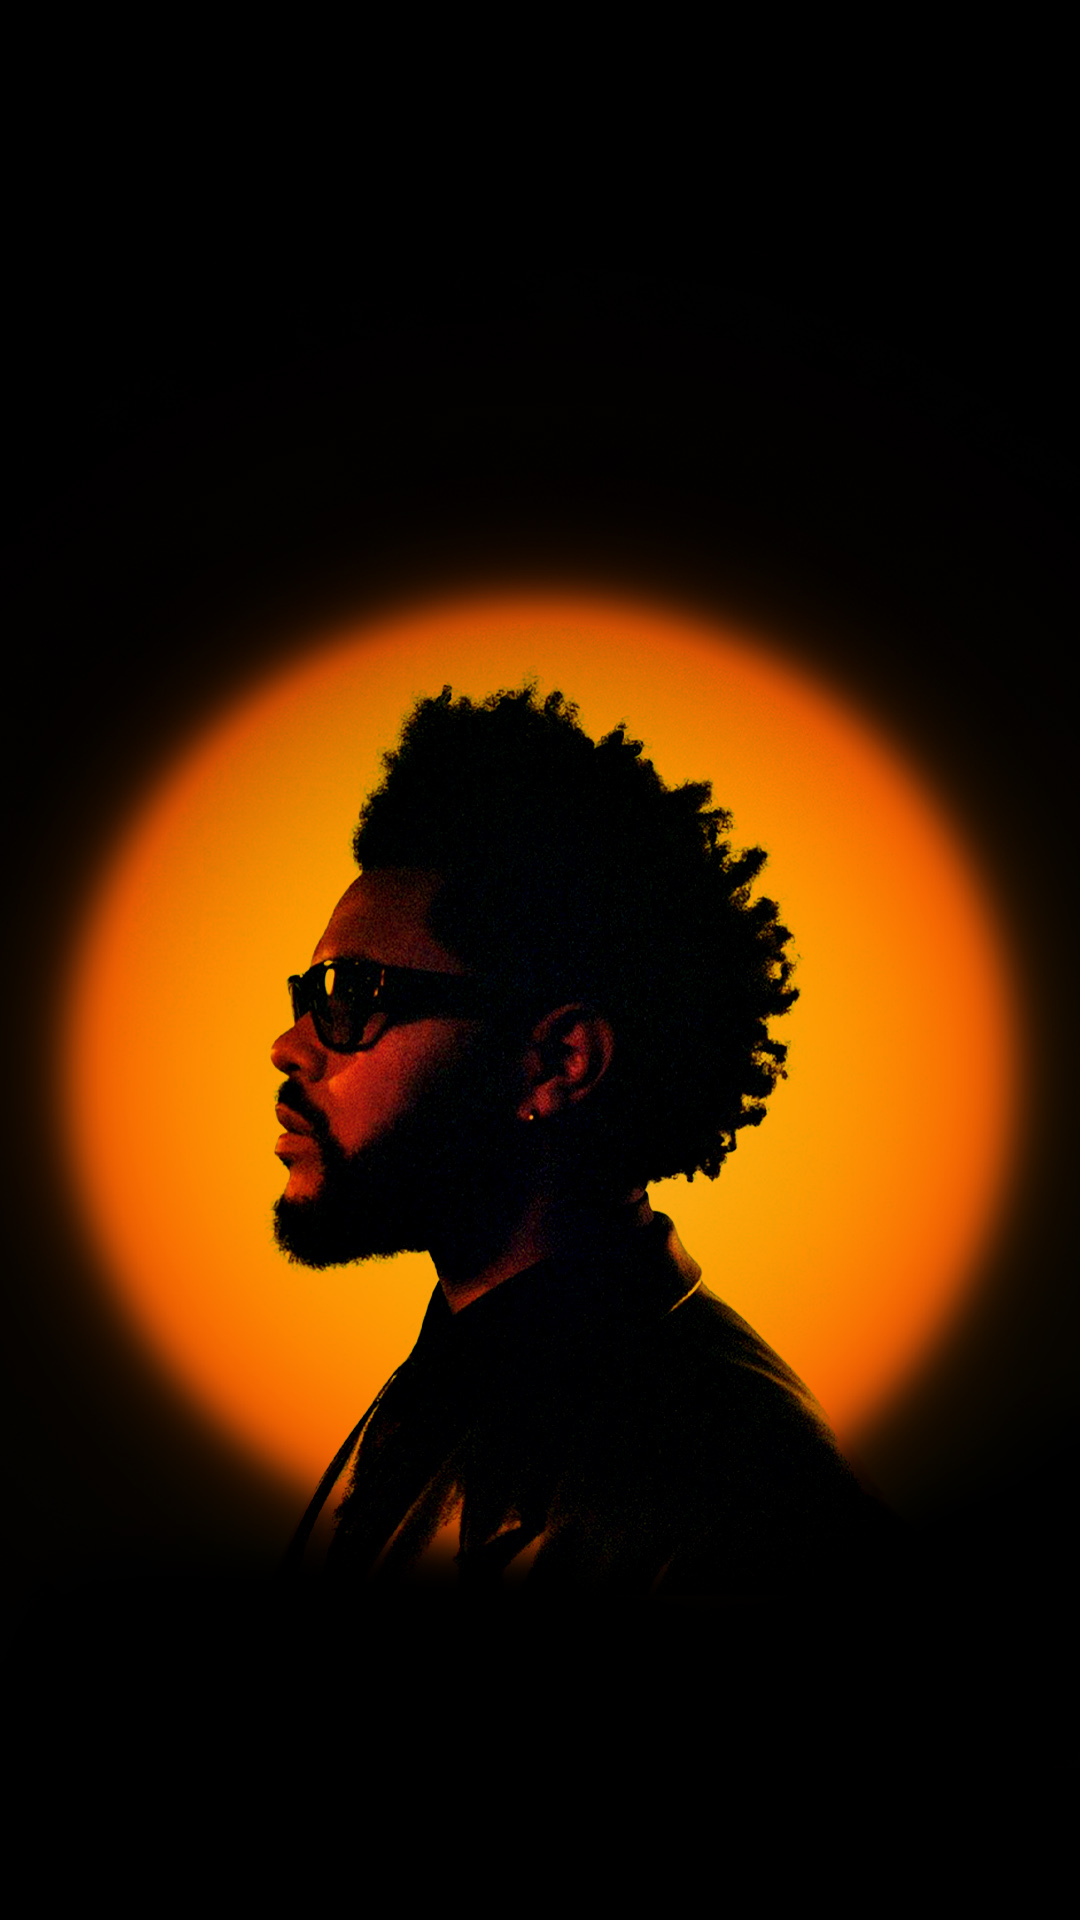 theweeknd  The weeknd wallpaper iphone The weeknd poster The weeknd  albums